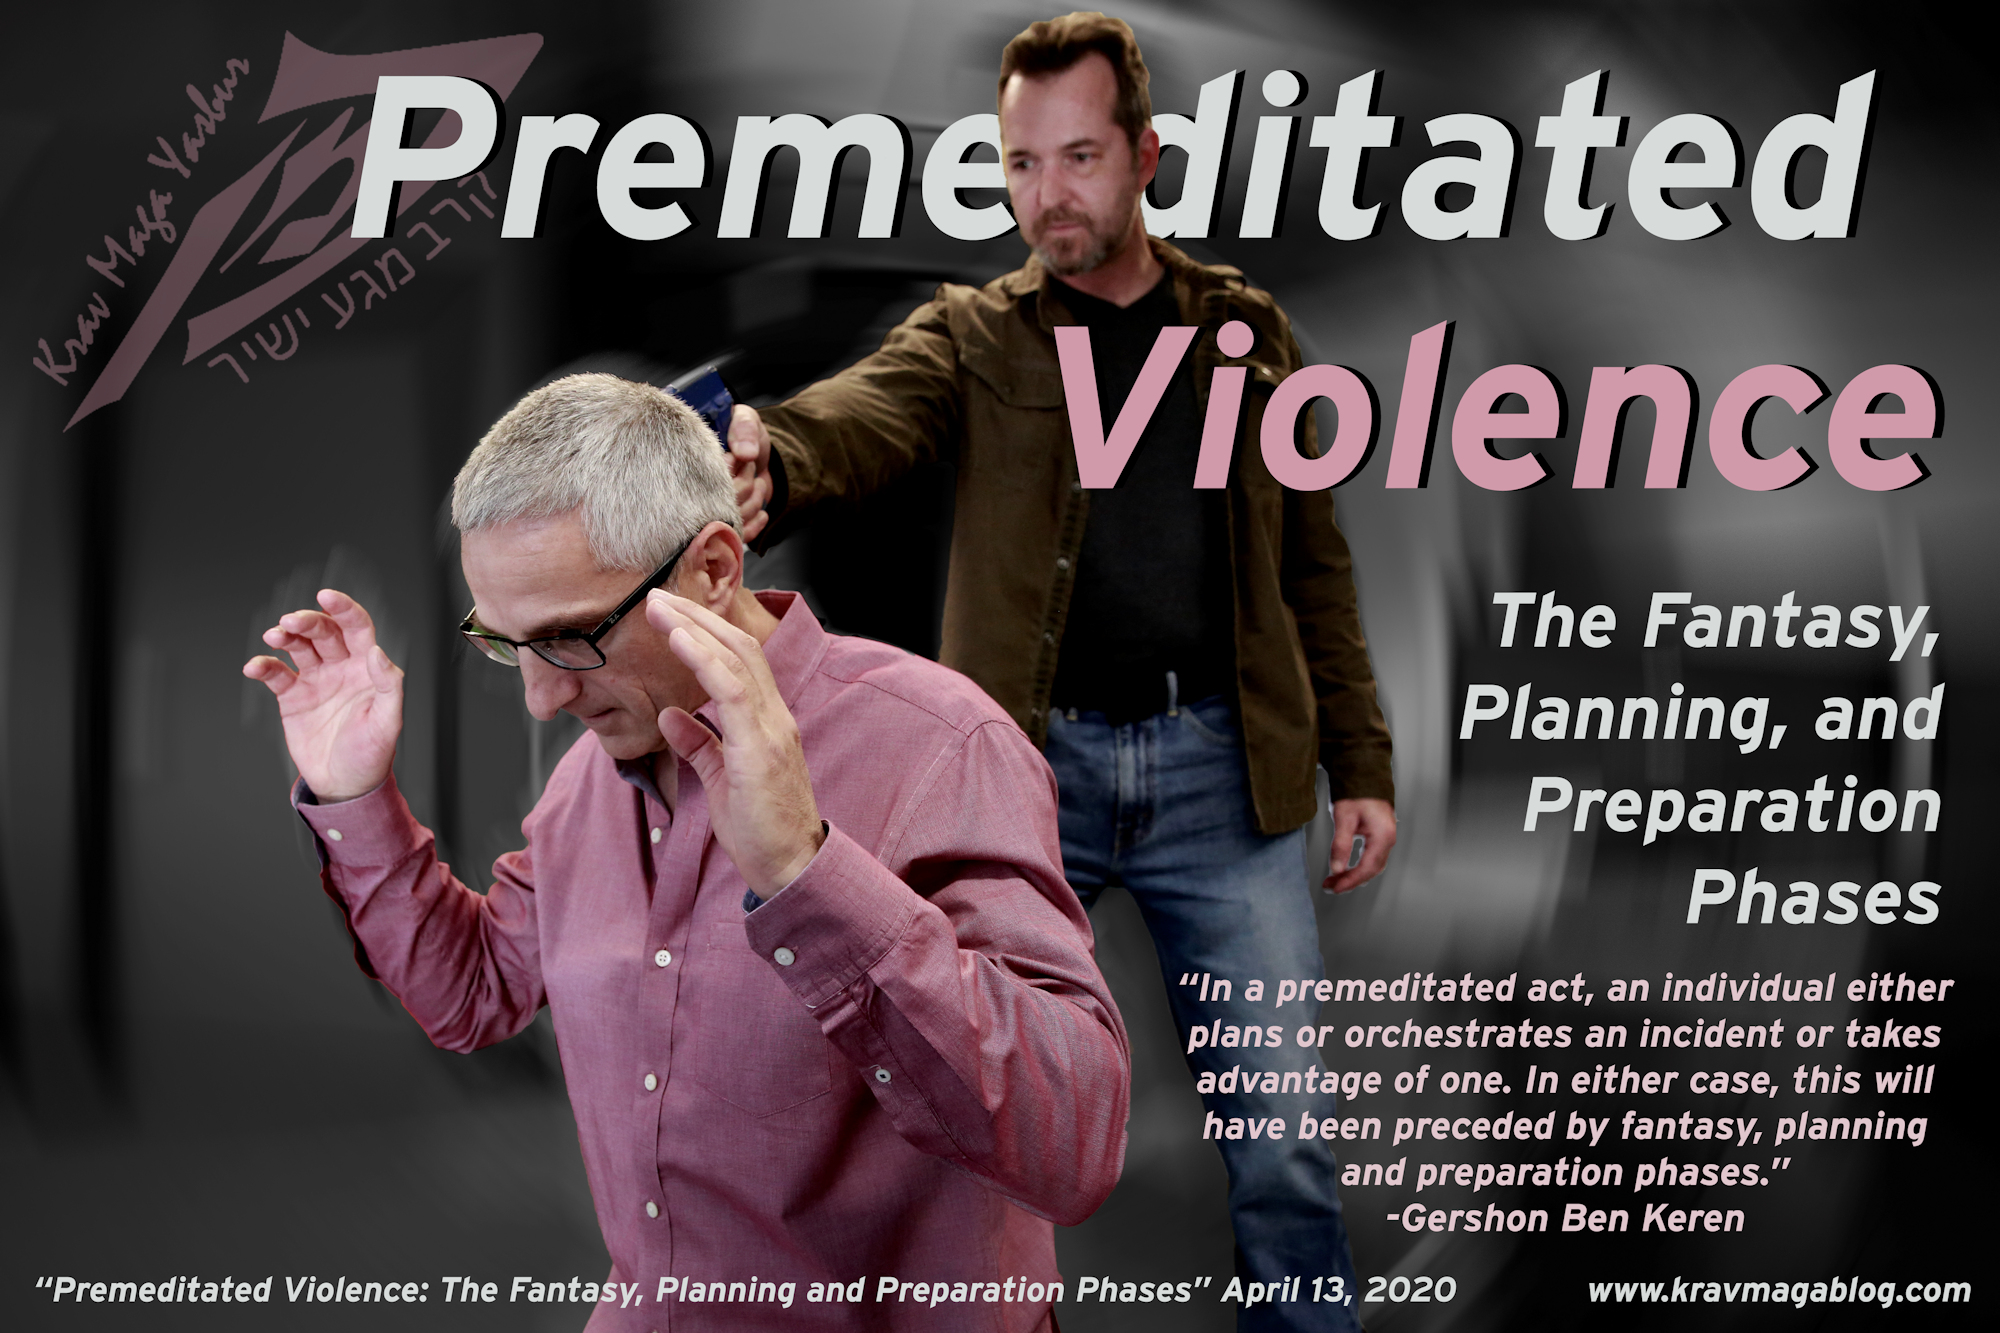 Blog About Premeditated Violence – The Fantasy, Planning & Preparation Phases